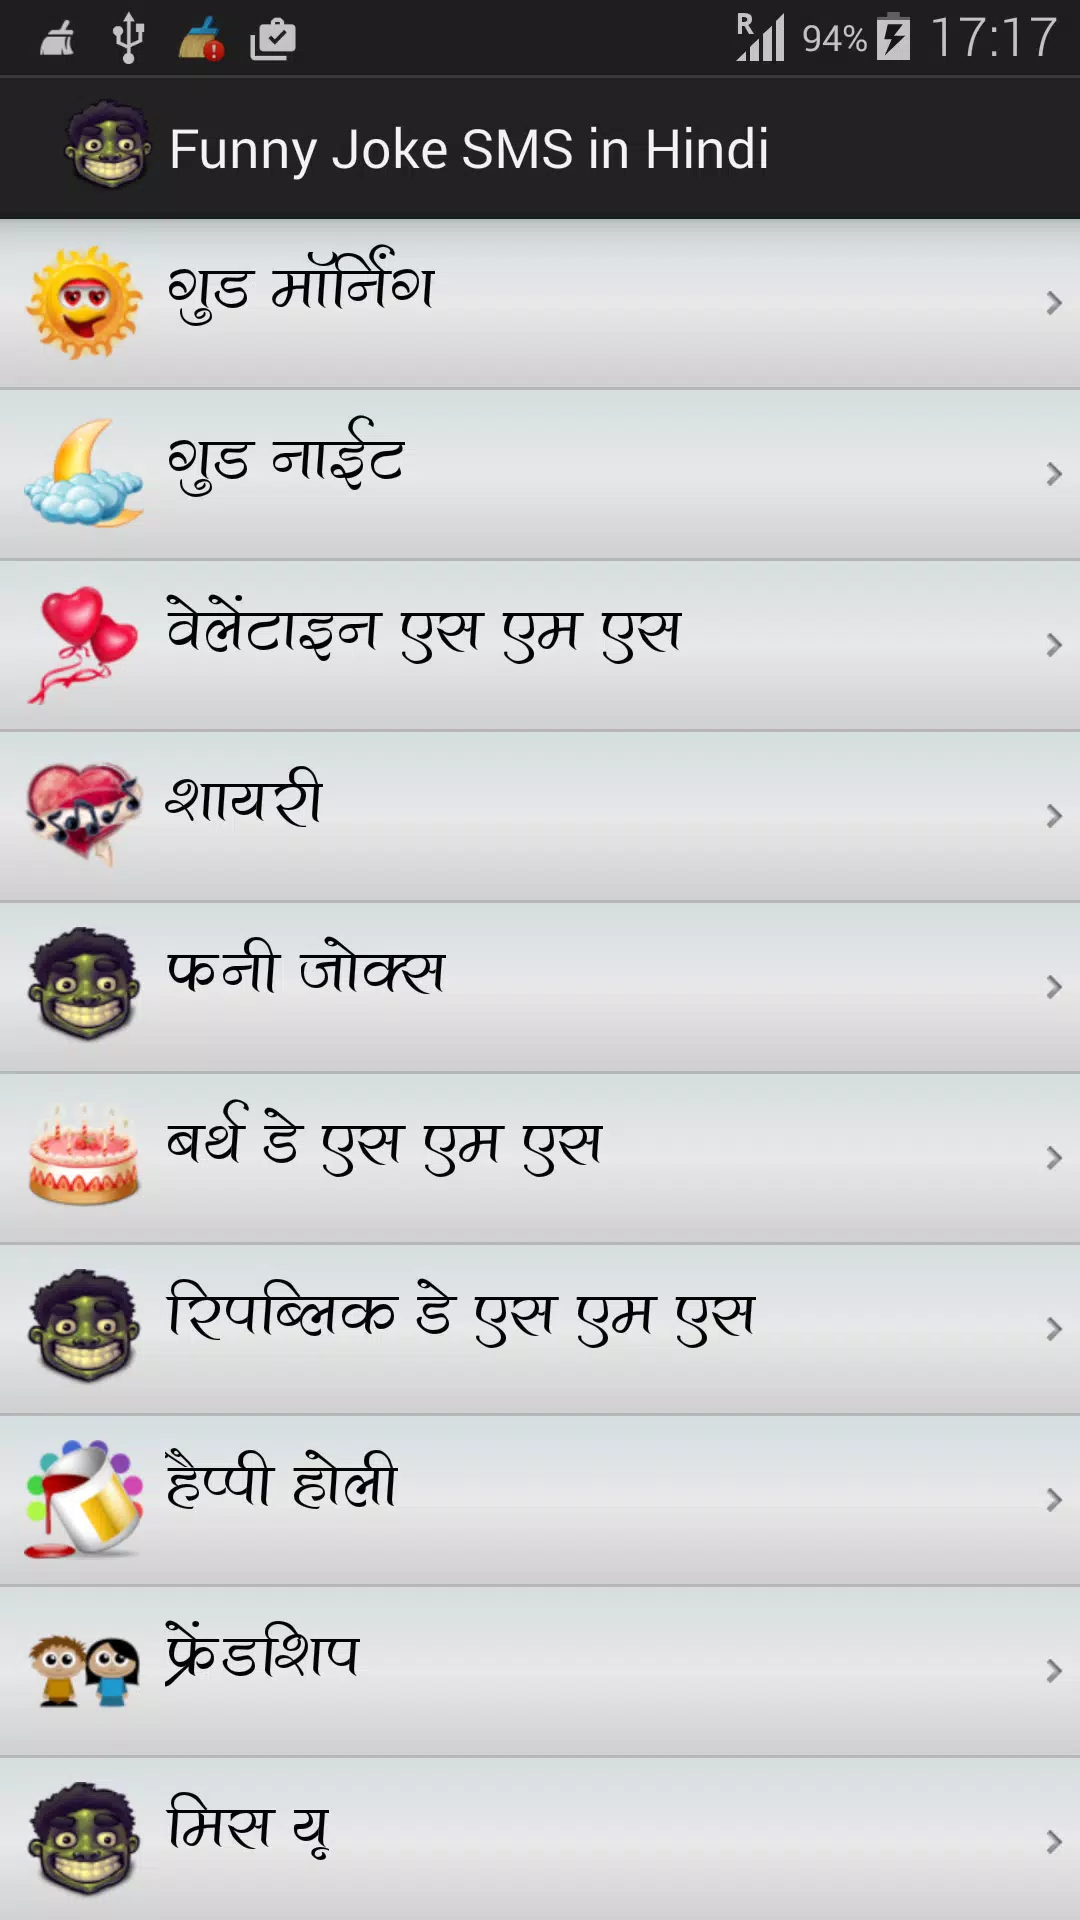 Funny Jokes SMS in Hindi APK pour Android Télécharger